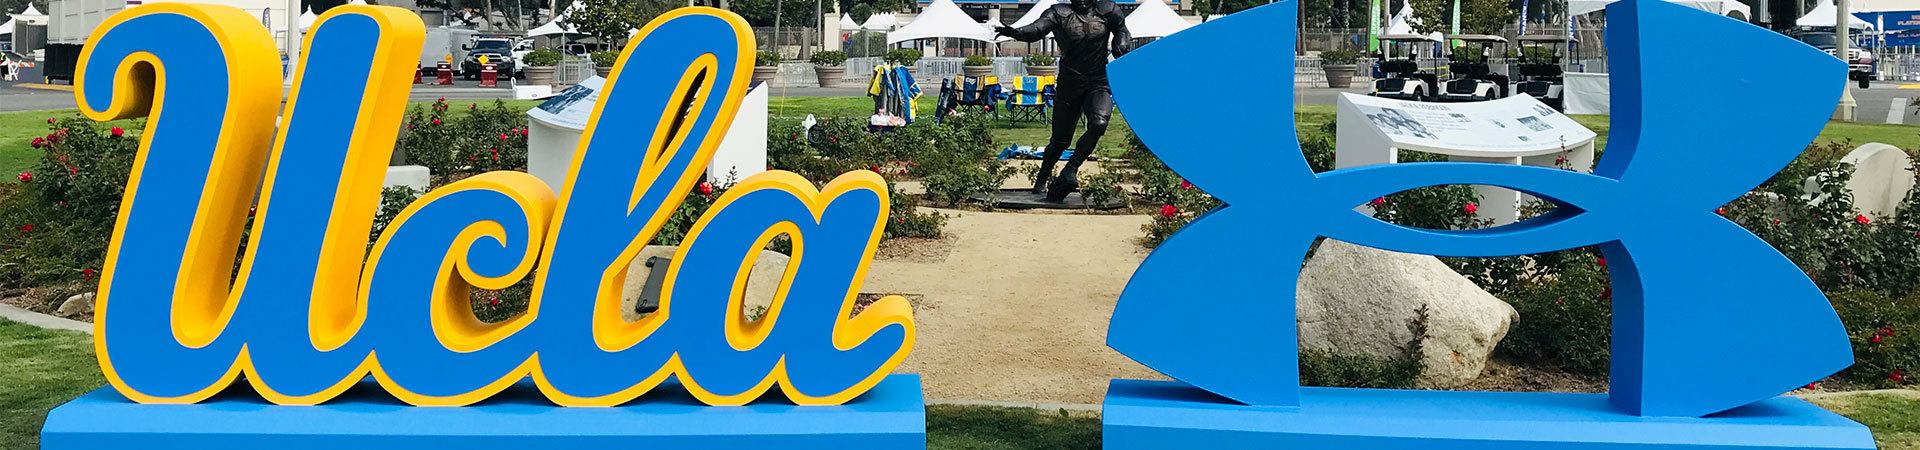 Large foam sculptures of the UCLA abbreviation and under armour logo for student selfies.